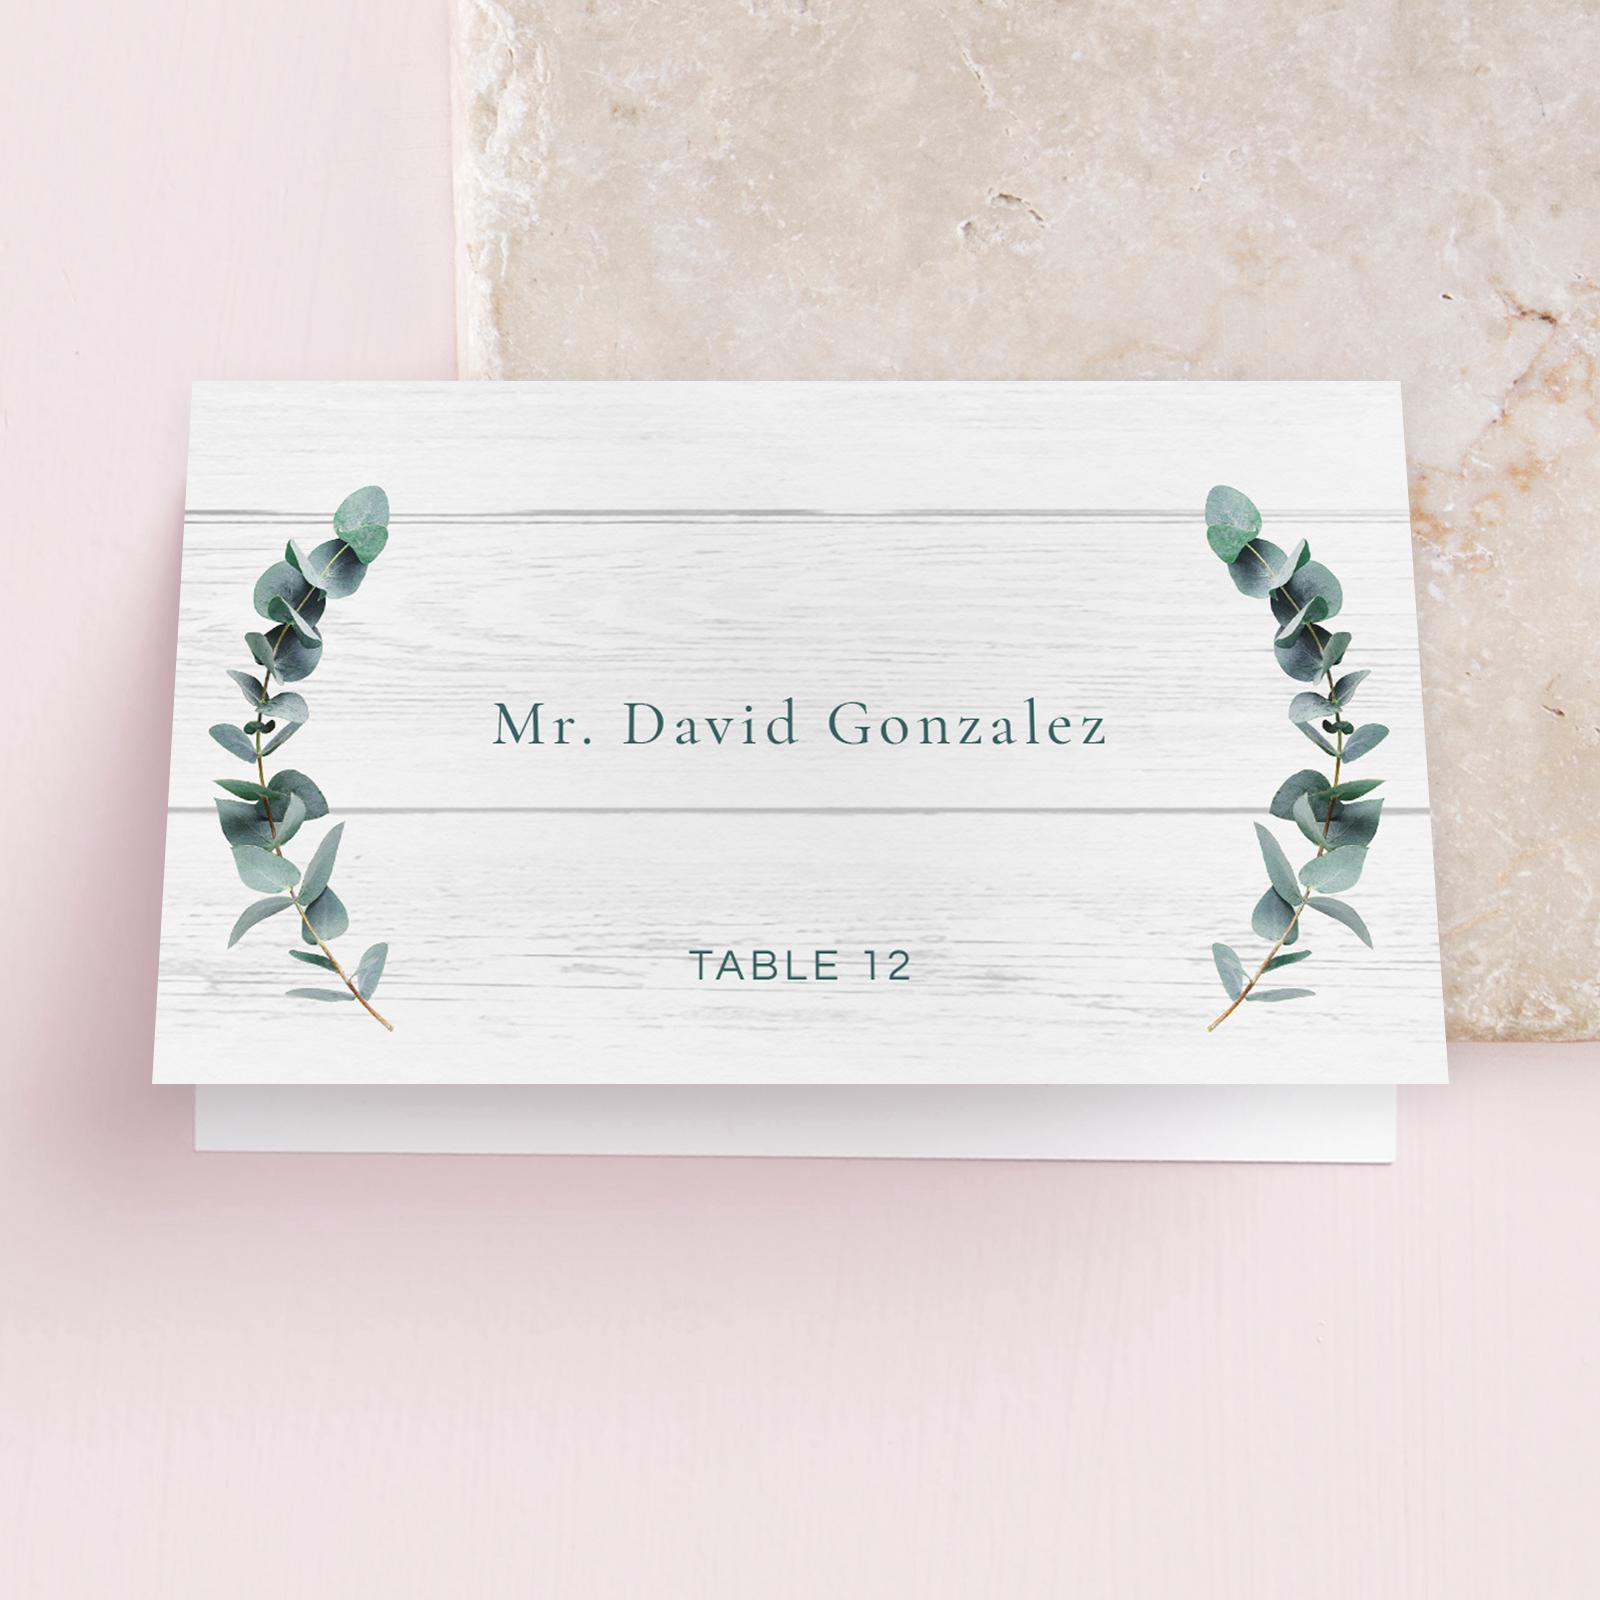 How to Make Place Cards for Your Wedding - Zola Expert Wedding Advice